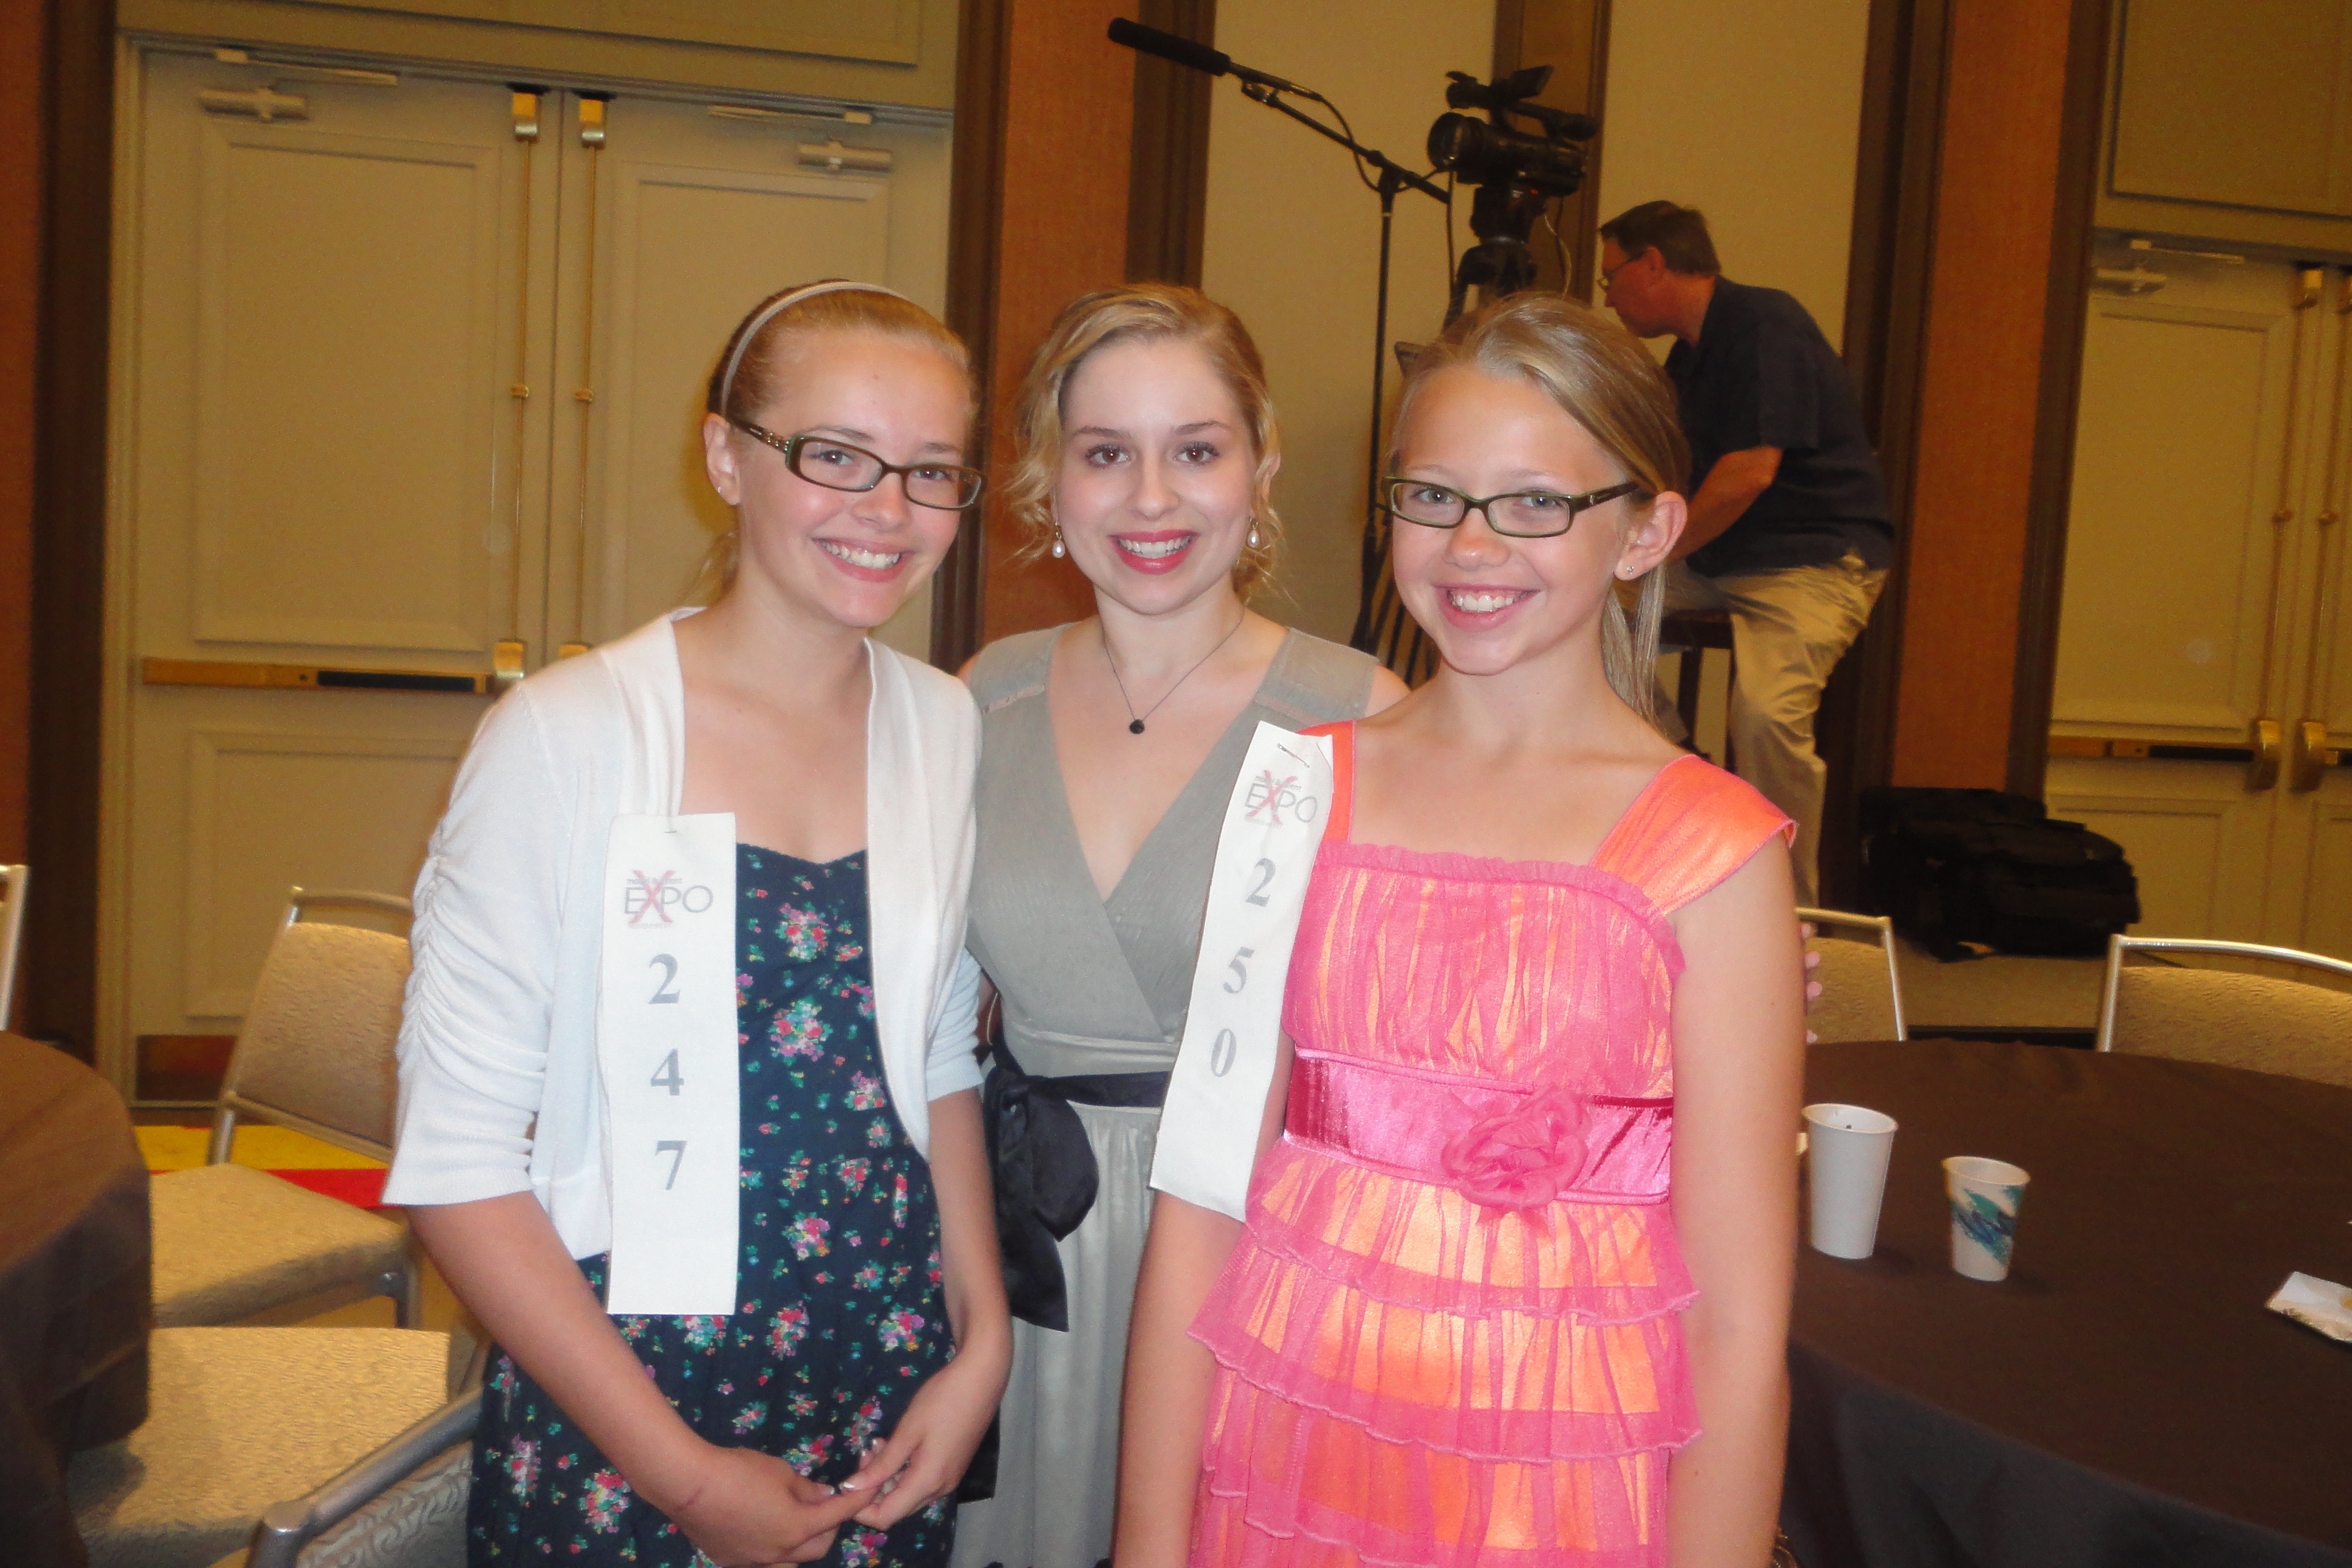 Posing with Allie Grant at the Mike Beaty Talent Expo in Dallas